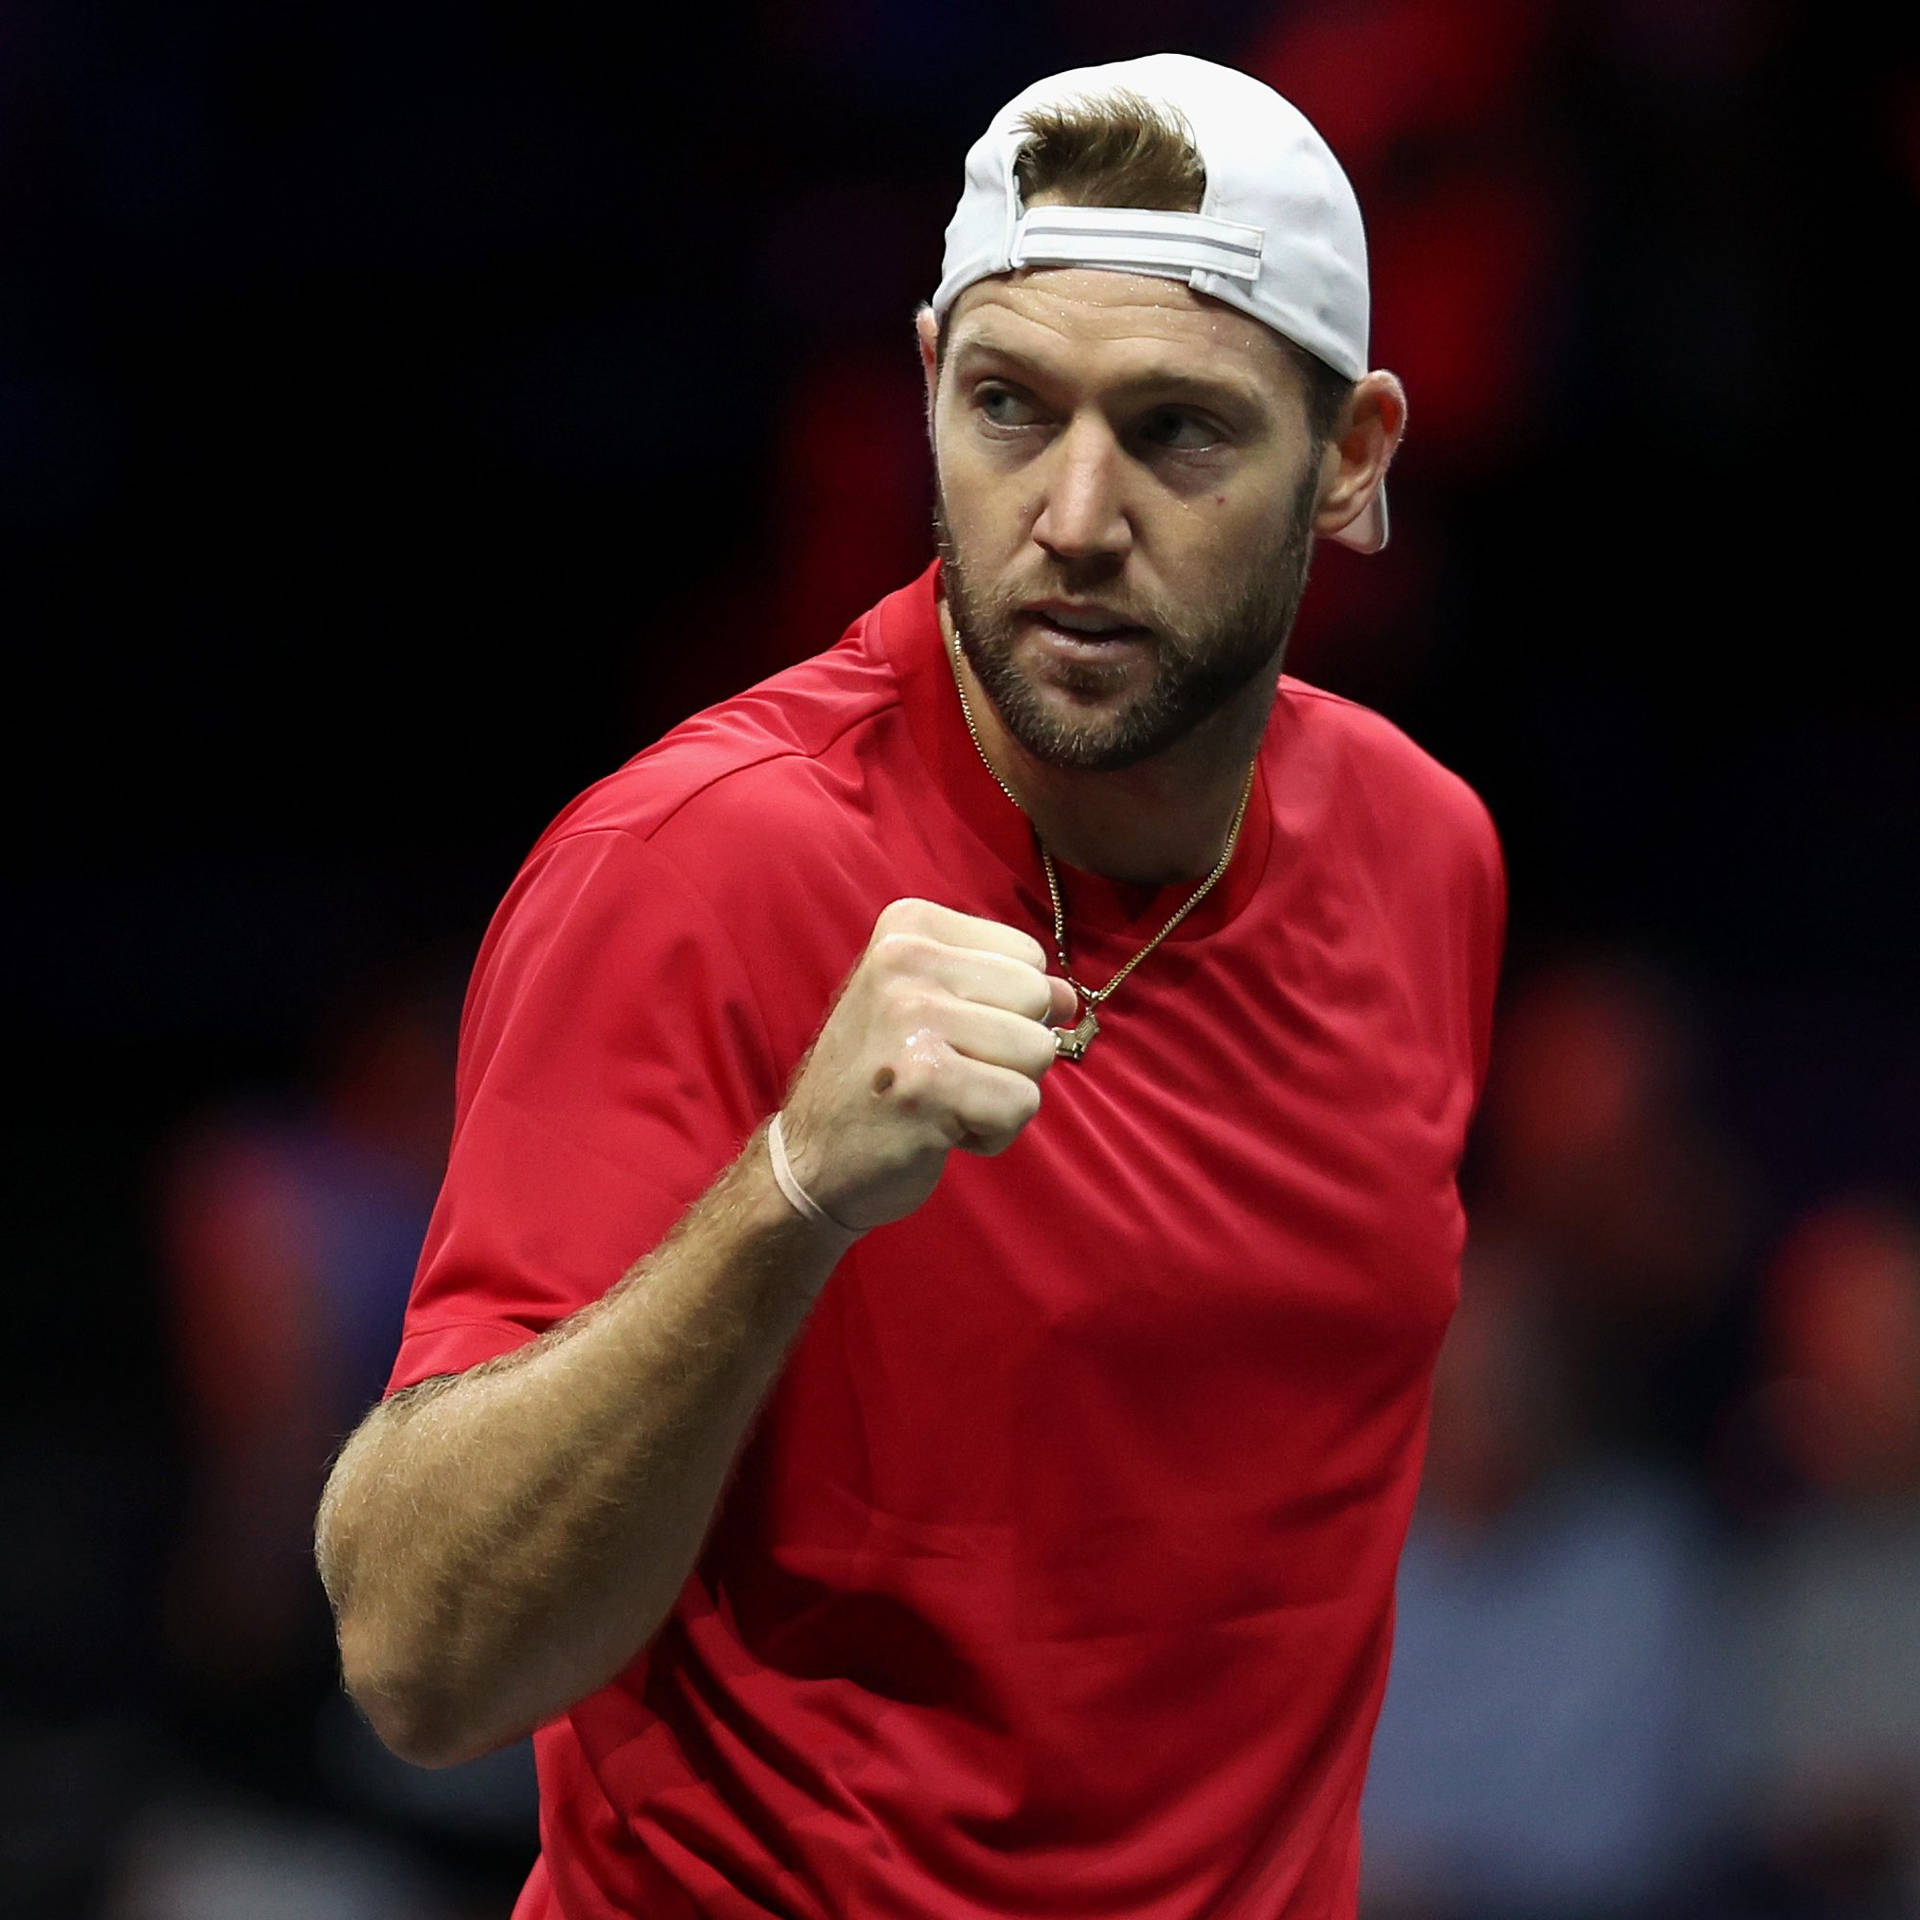 Jack Sock With Clenched Fist Wallpaper